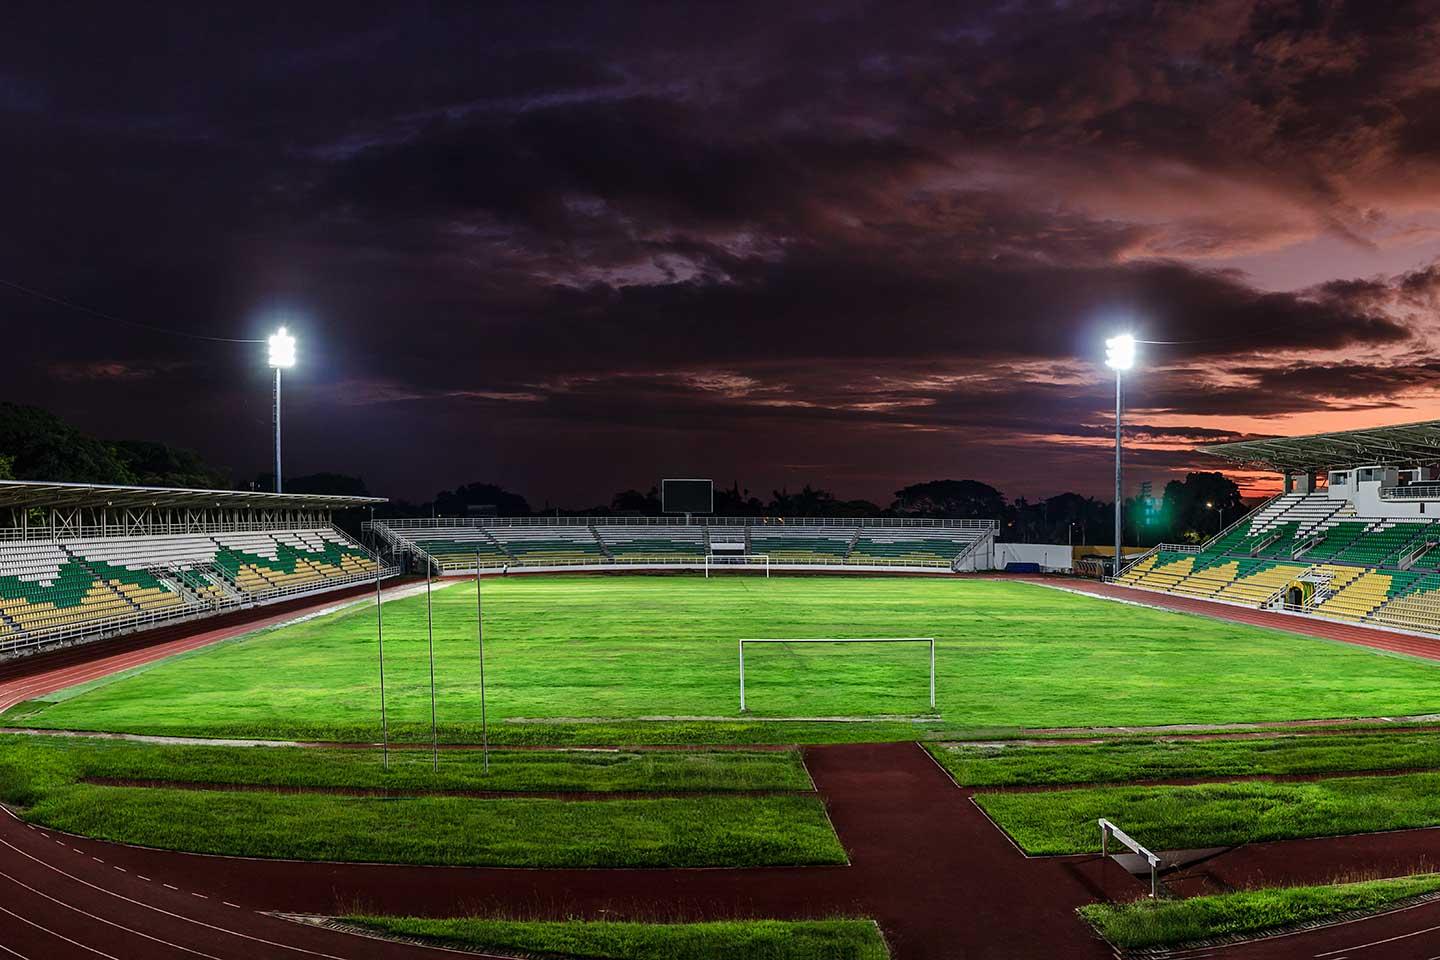 Energy efficient sports lighting solution improves quality of light at Francisco Rivera Escobar Stadium while reducing costs